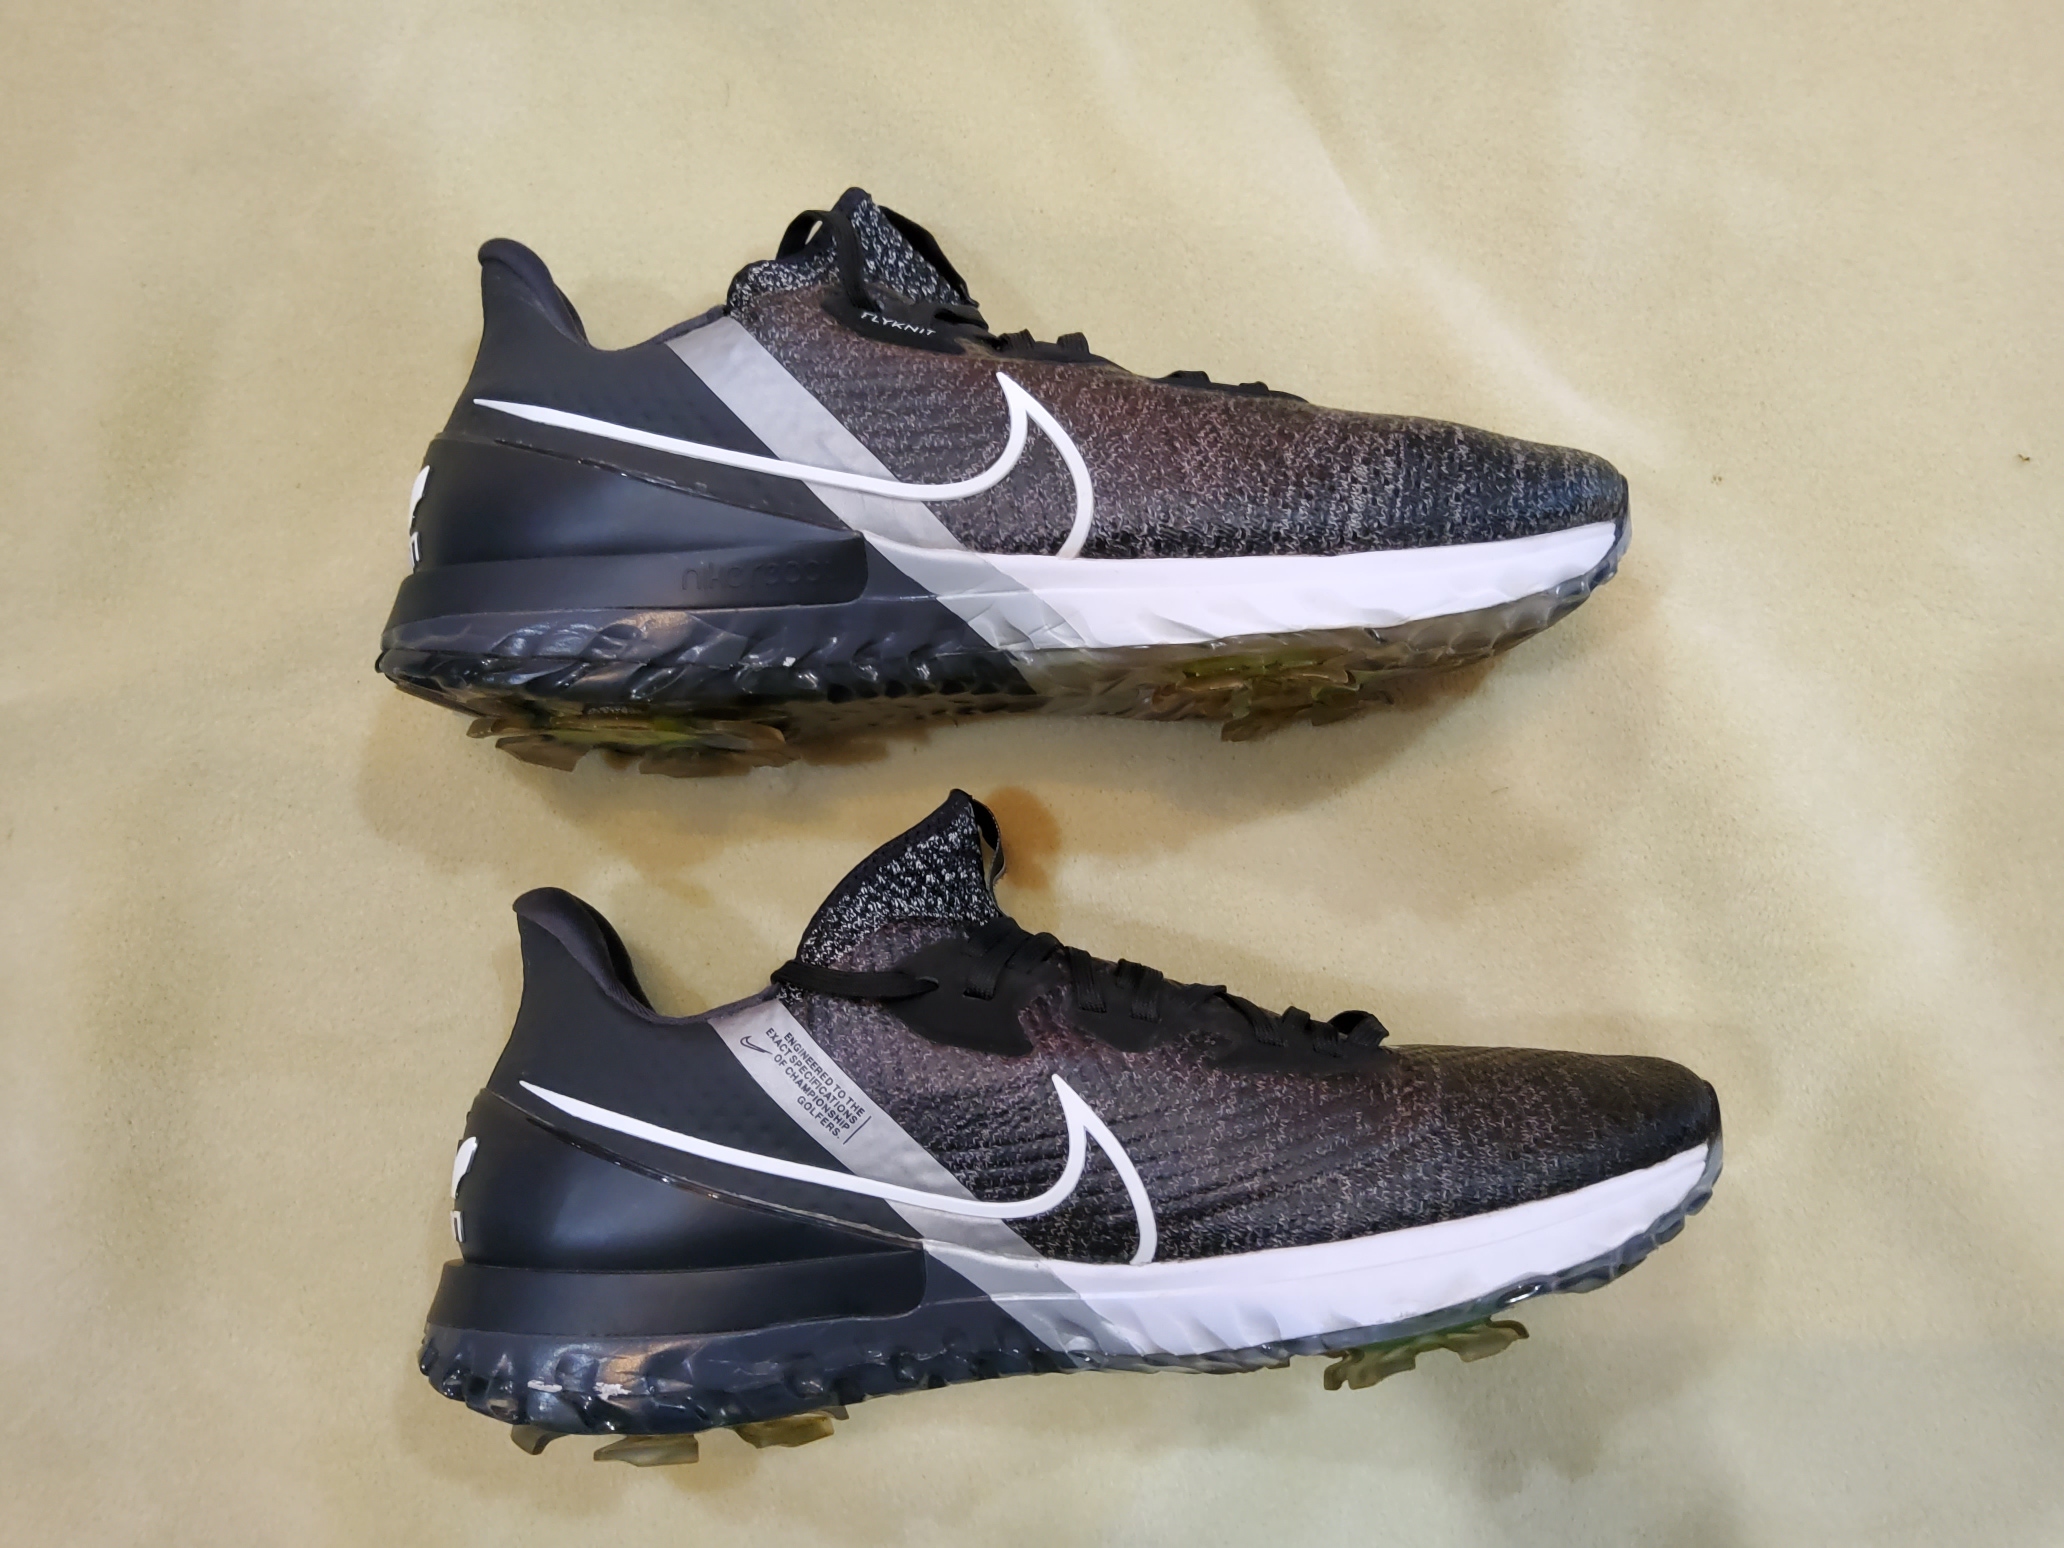 Used Men's Size 11.5 (Women's 12.5) Nike Air Zoom Infinity Tour Golf Shoes Black/Silver/White